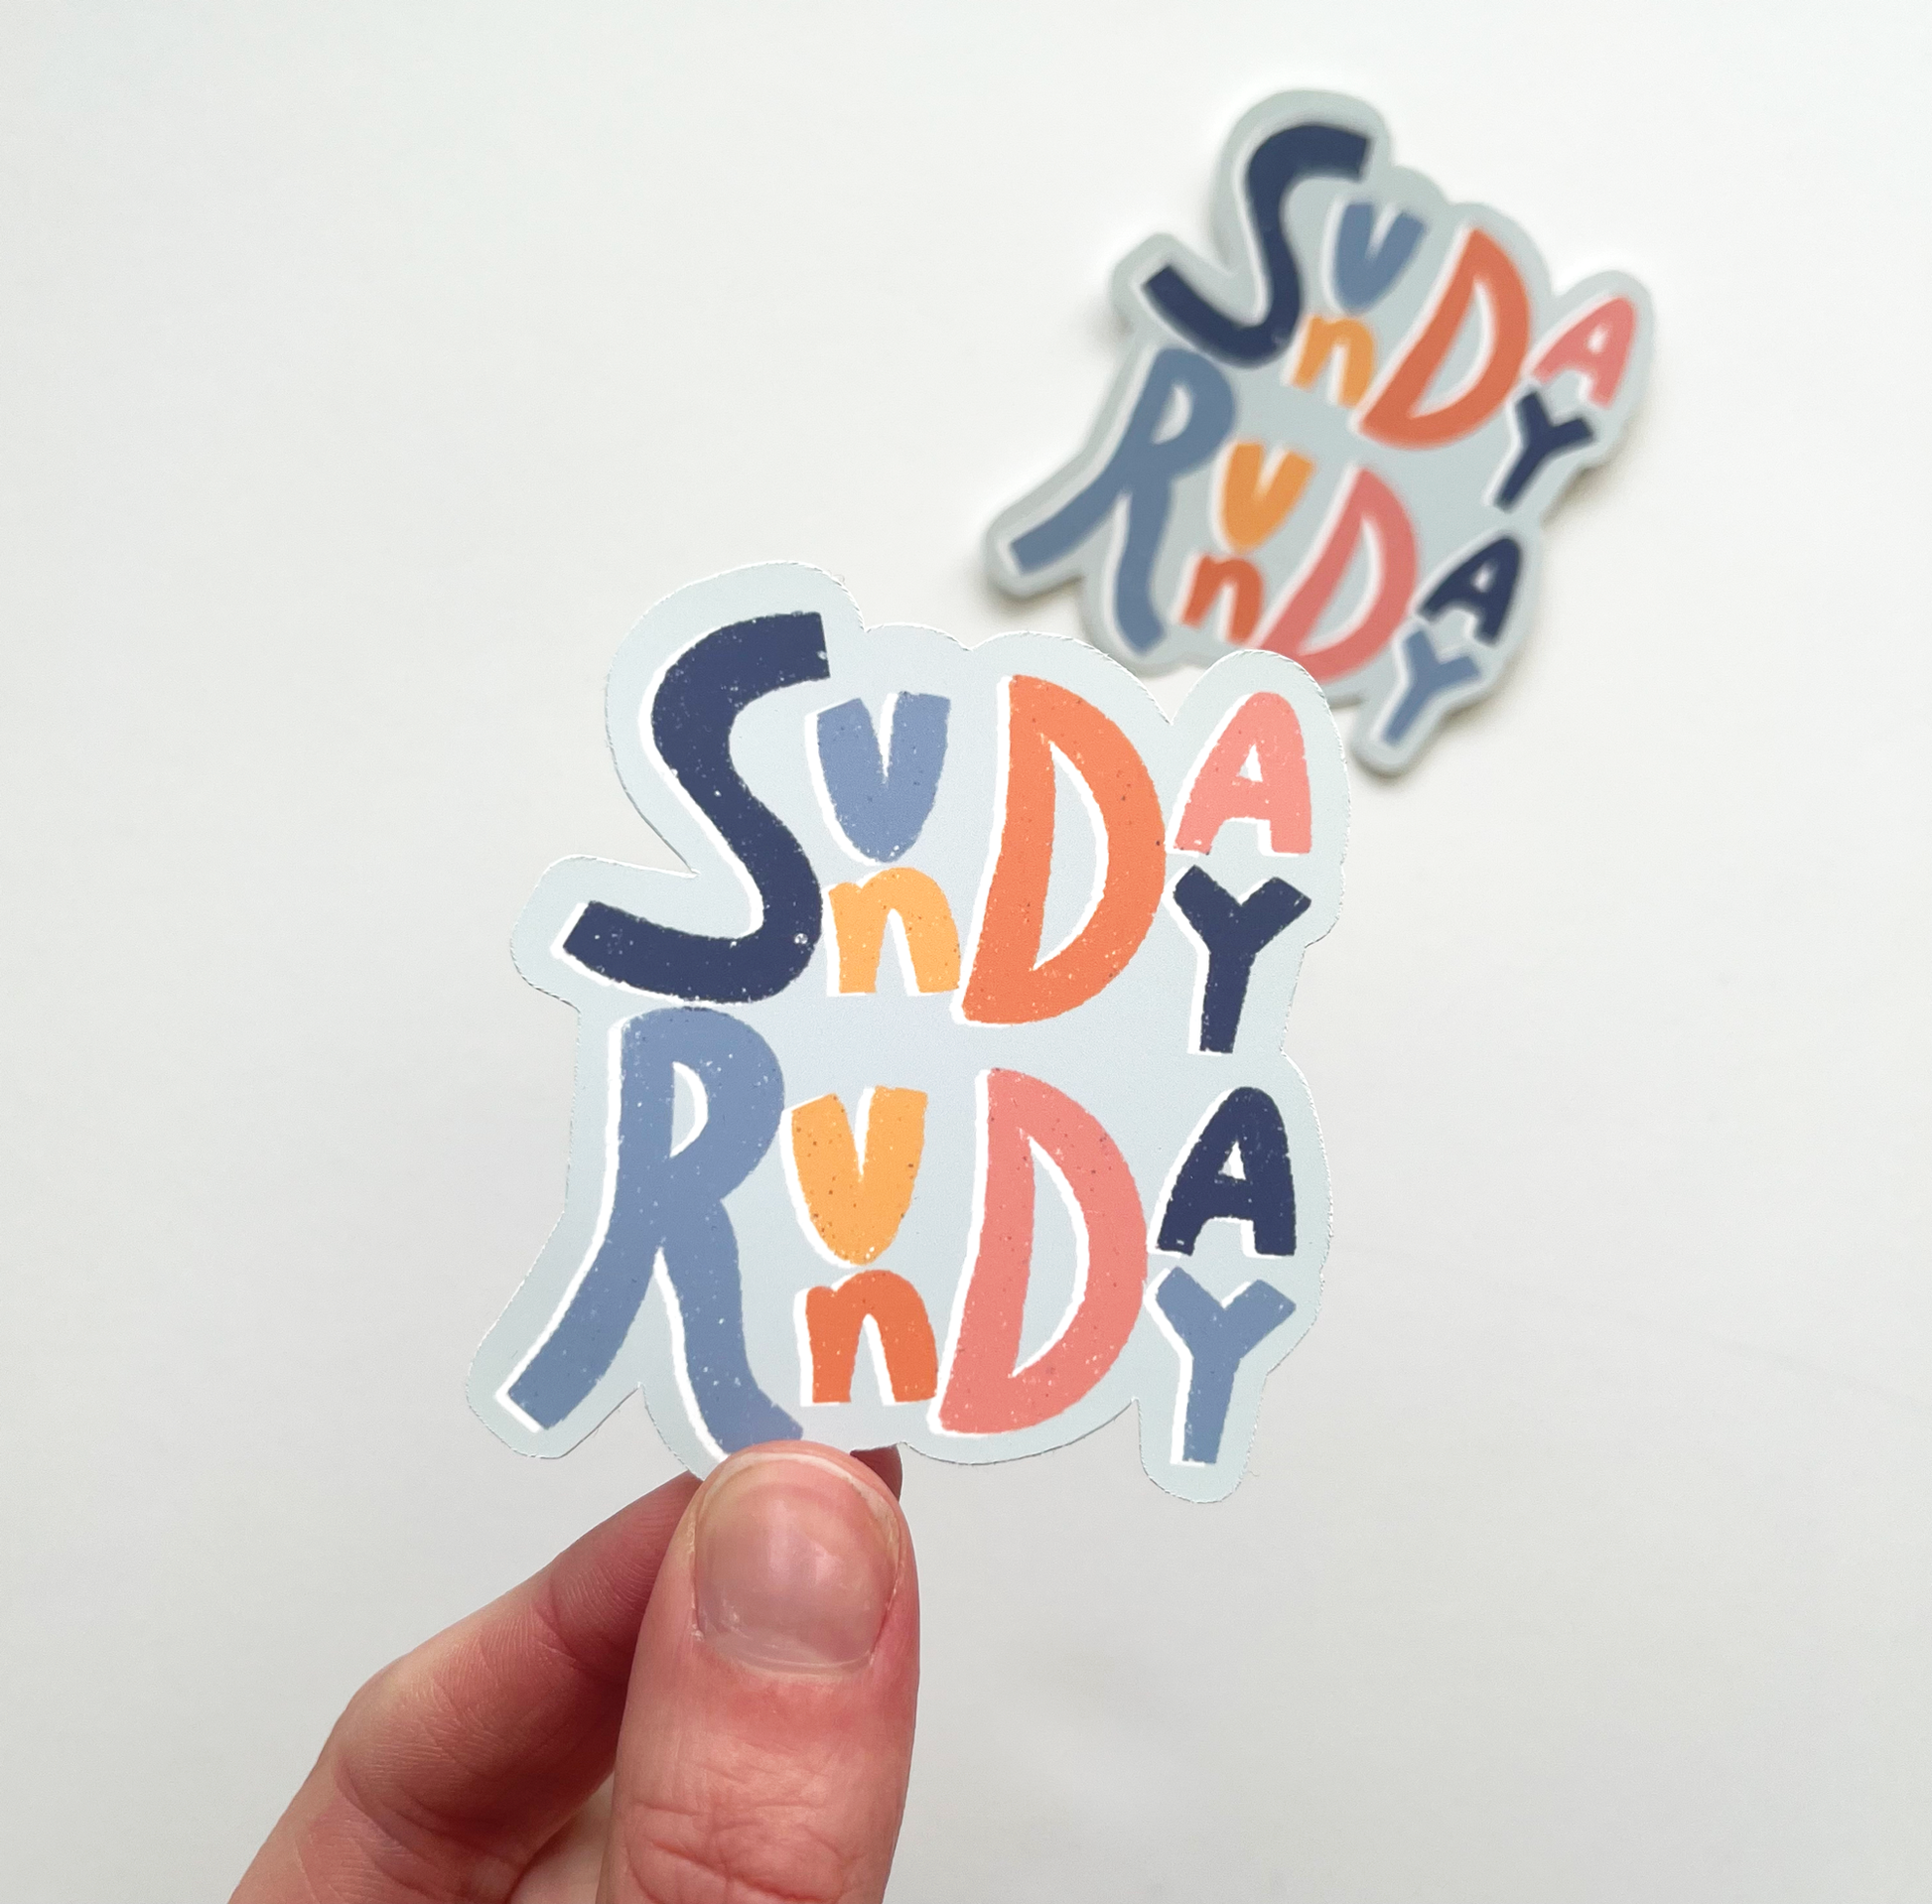 Sunday Runday sticker with alternating letters of dark blue, light blue, yellow, orange and pink